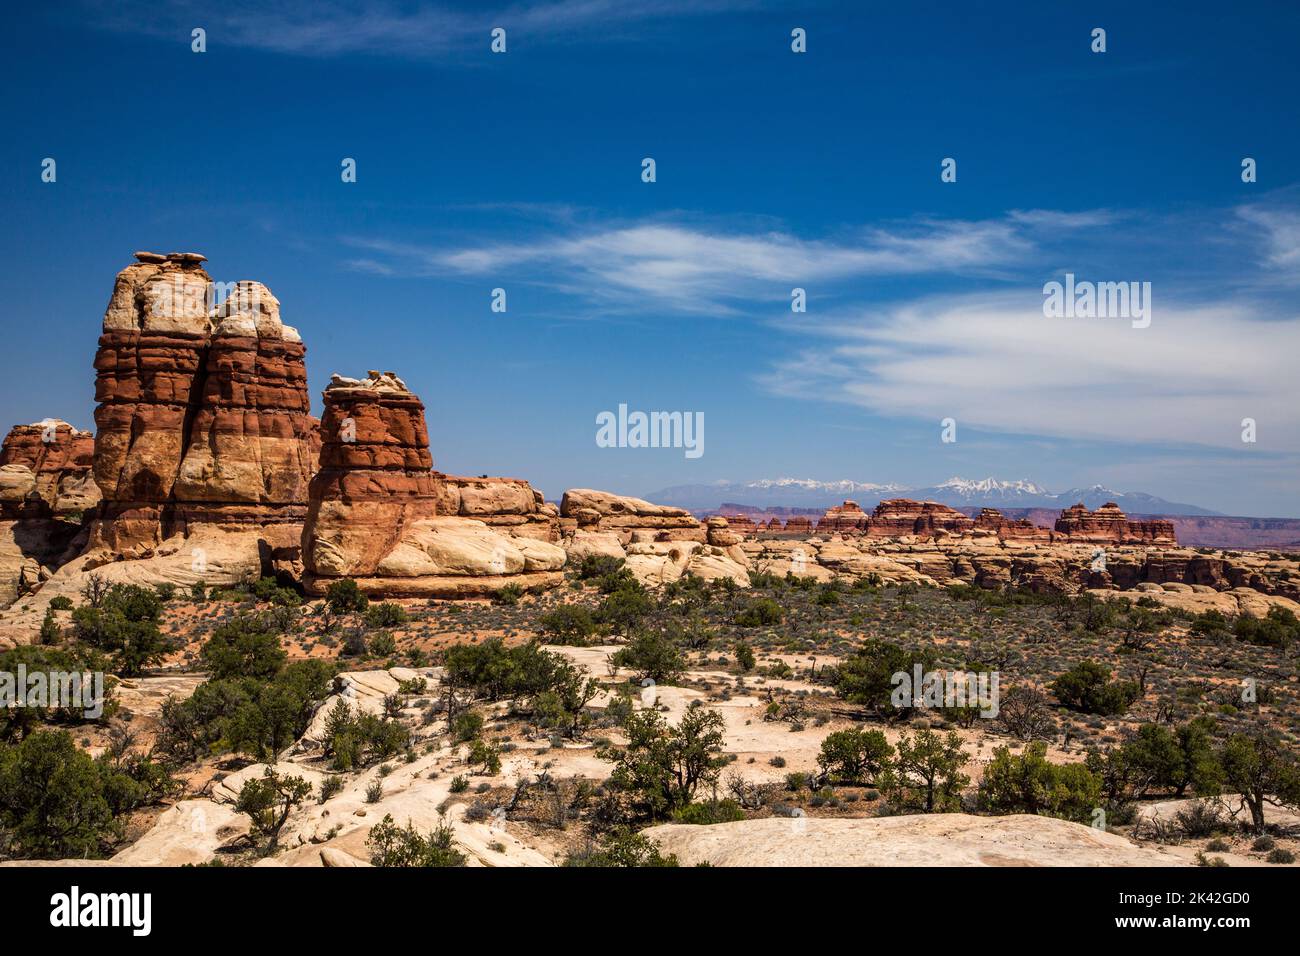 Cedar Mesa sandstone formations in the Doll House area of the Maze District of Canyonlands National Park, Utah.  The La Sal Mountains are behind. Stock Photo